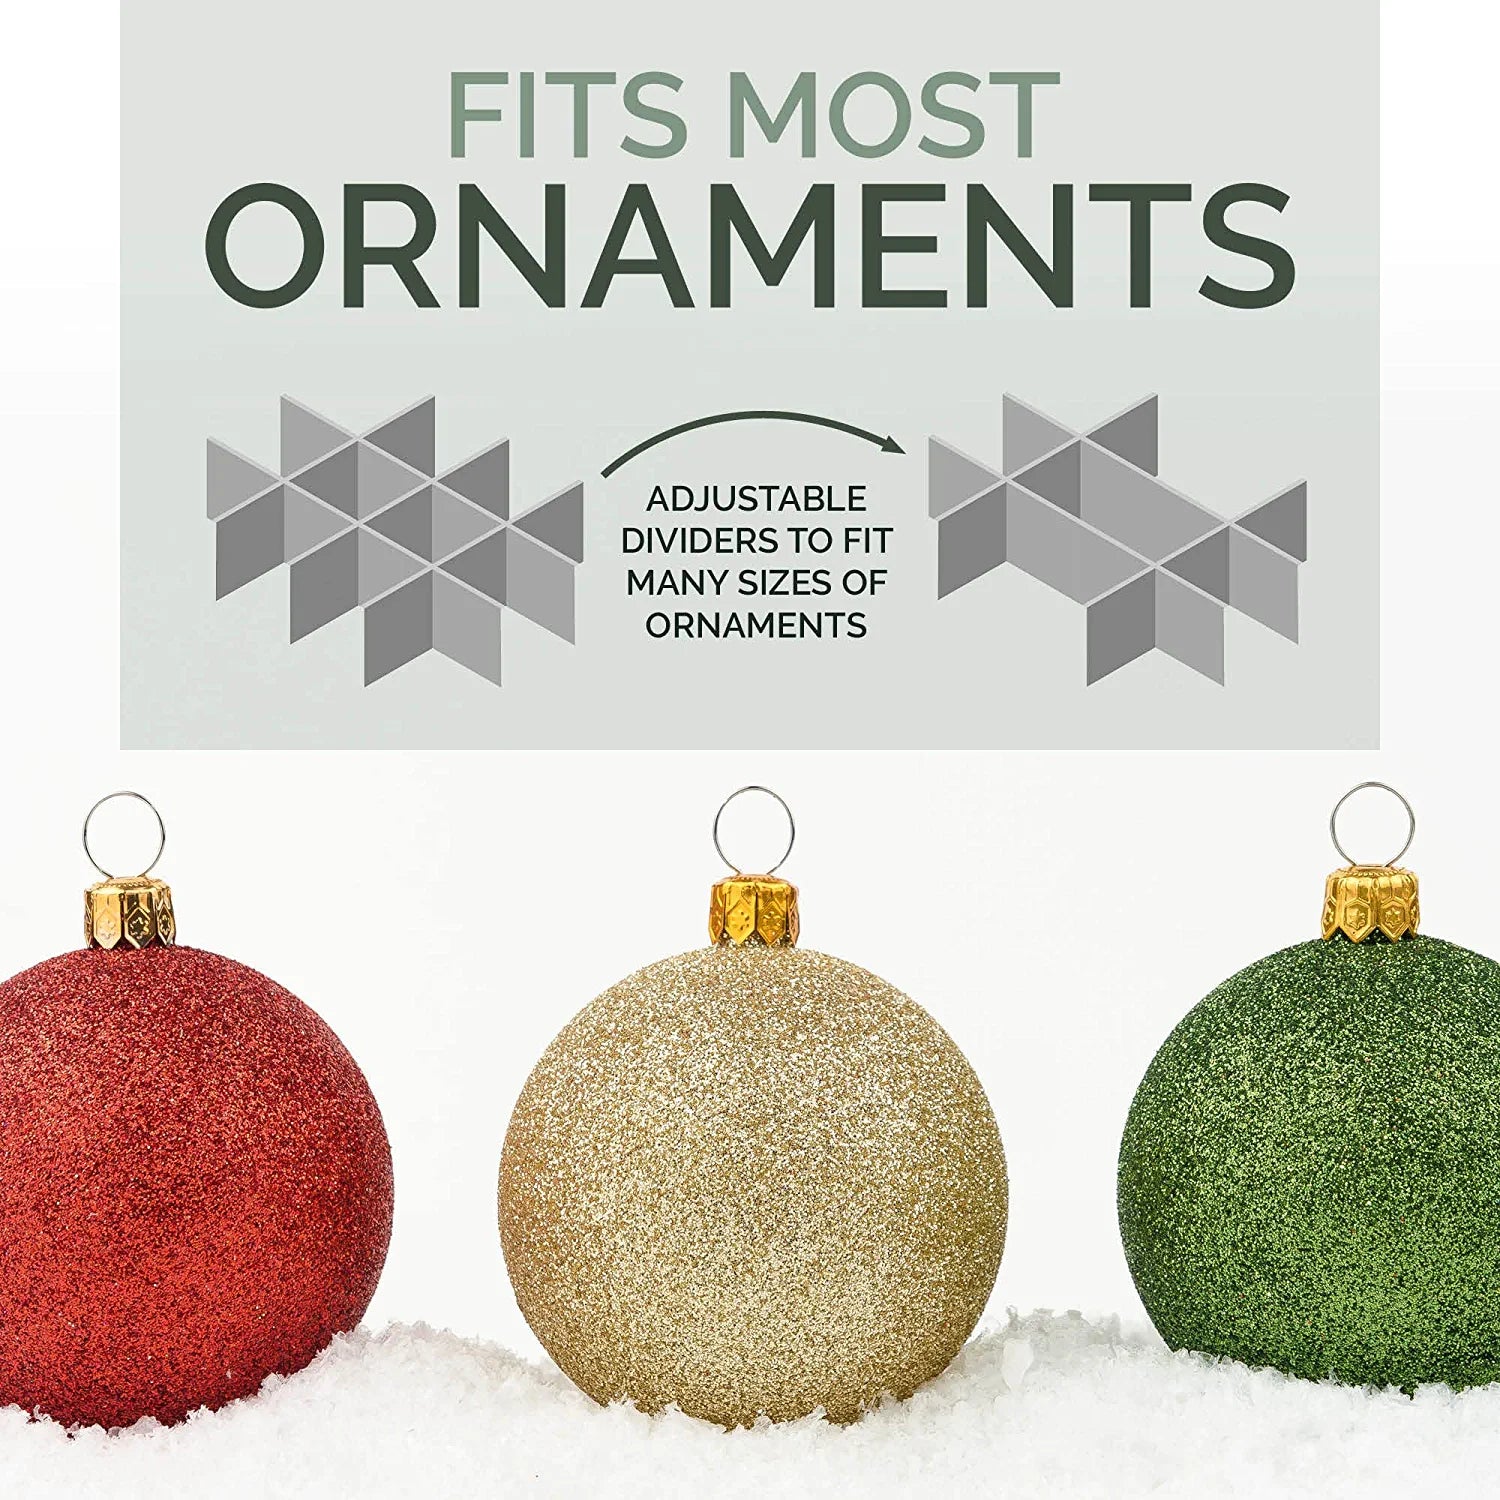 Christmas Ornament Storage Container Box with Dividers - Stores up to 72  Ornaments - Large Christmas Ball Storage Bins with 3 Removable Trays.